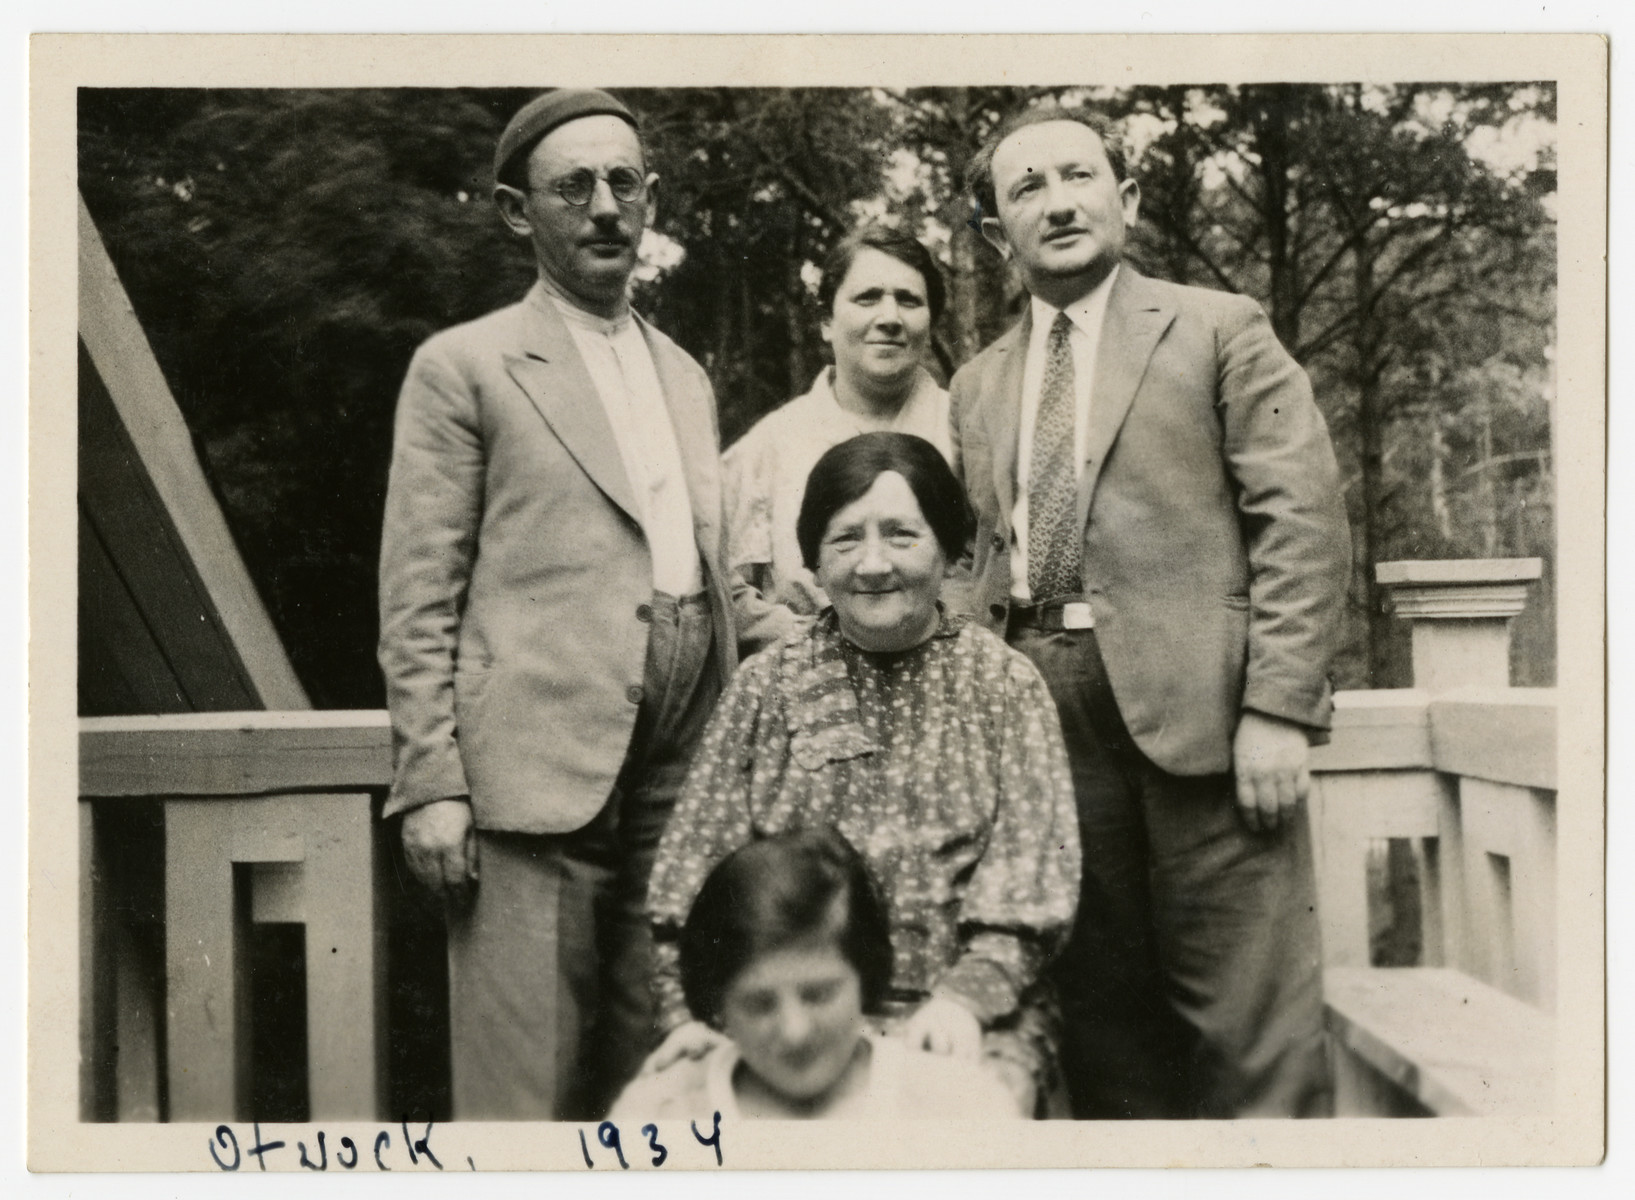 Miriam Rabinowitz sits on a porch surrounded by her children and granddaughter. 

In the front is Celinka Rabinowitz (Szyja's daughter).  Standing from left to right are Szyja, Doba (Szyja's wife) and Pinchas Rabinowitz.